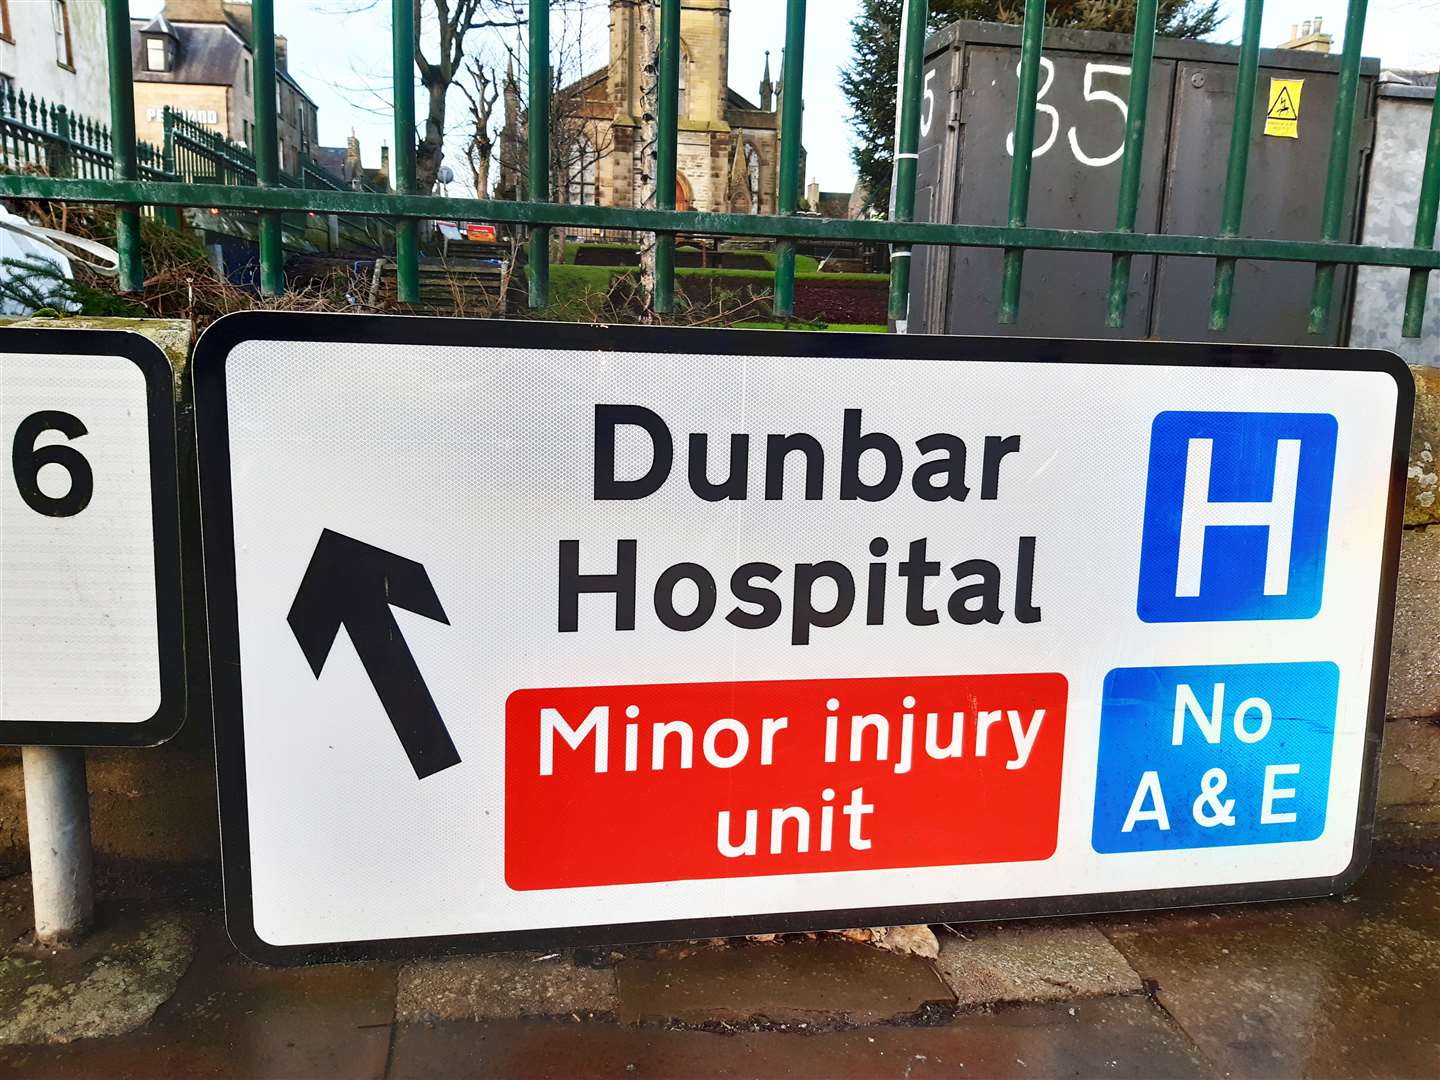 A sign for the Dunbar MIU in Sir John's Square, Thurso. Unlike those near the hospital itself, this one had not been covered up.